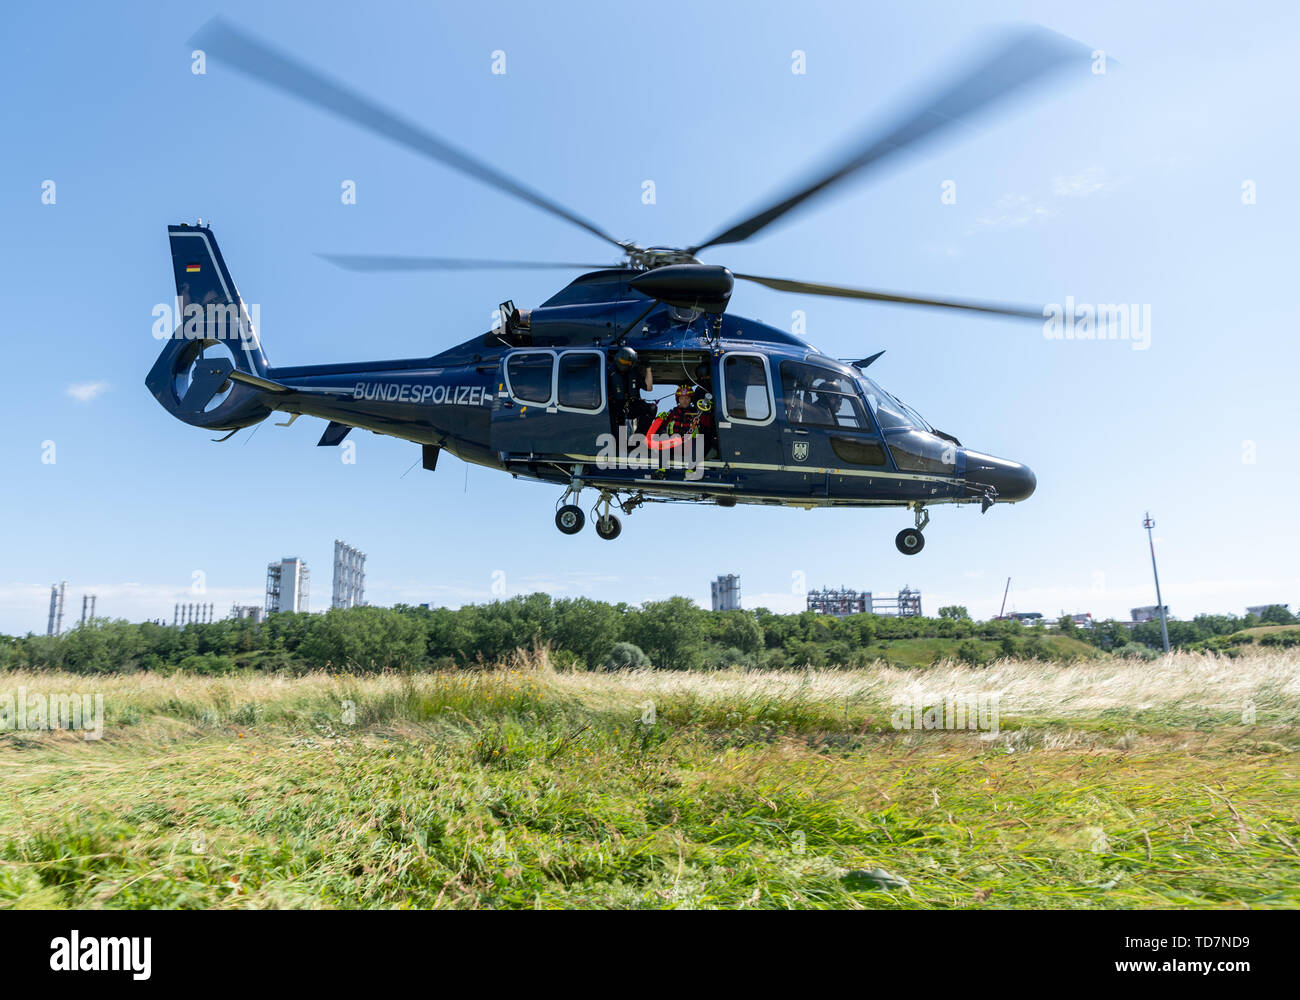 13 June 2019, Saxony, Nünchritz: An EC 155 b1 helicopter takes off from a field during a helicopter-assisted water rescue exercise from the Elbe. The Bundespolizei-Fliegerstaffel Blumberg, together with the Wasserwacht Sachsen and the Deutsche Lebens-Rettungs-Gesellschaft e.V. (German Life and Rescue Society), leads the (DLRG) is conducting a joint exercise to rescue people from flowing waters. The Wacker Chemie AG plant can be seen in the background. Photo: Robert Michael/dpa-Zentralbild/dpa Stock Photo